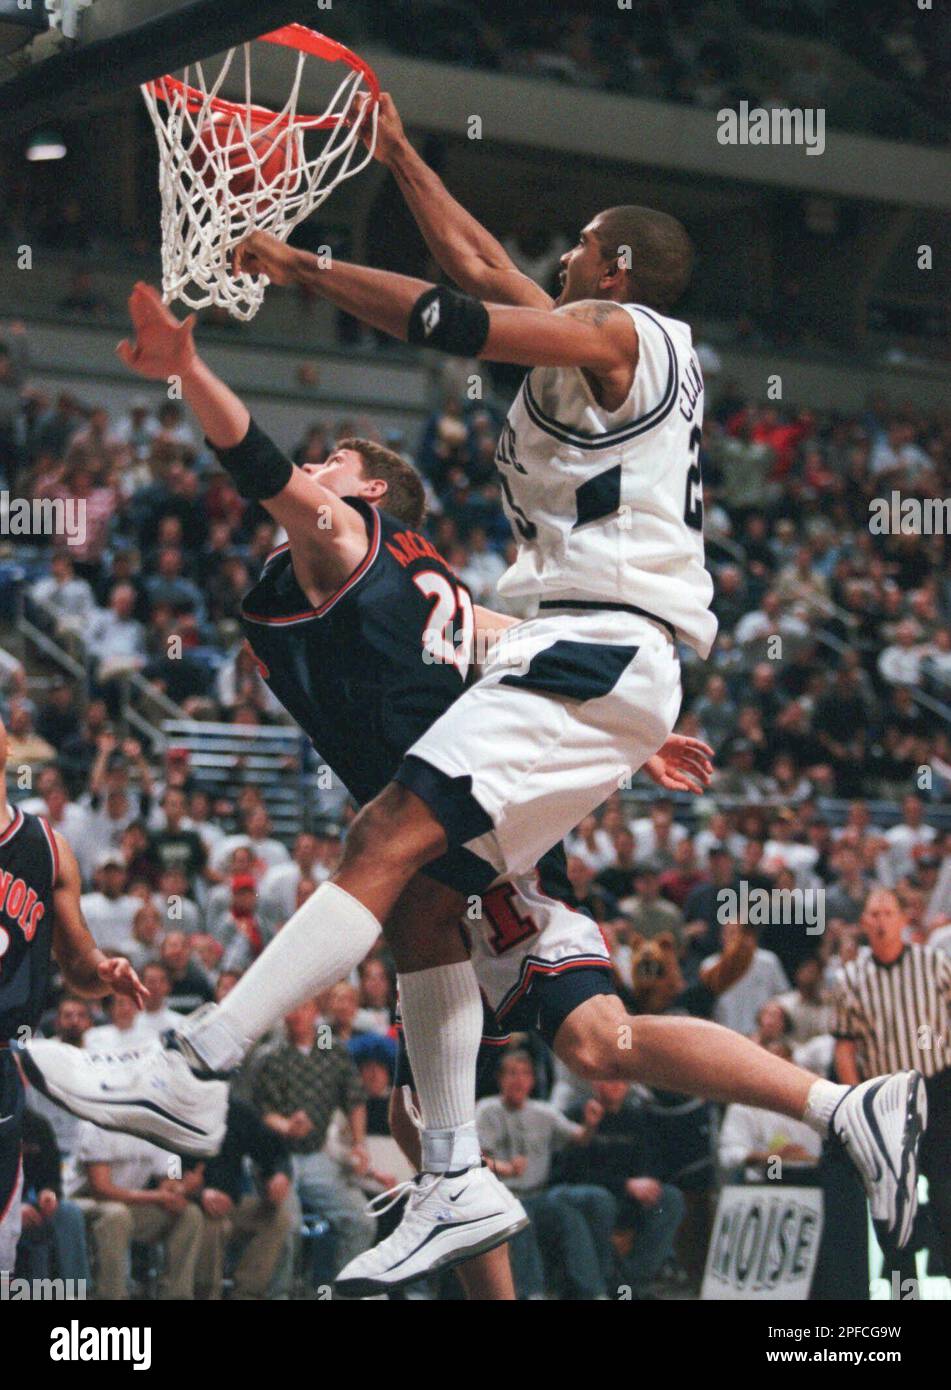 https://c8.alamy.com/comp/2PFCG9W/penn-states-gyasi-cline-heard-right-is-fouled-by-illinois-robert-archibald-left-with-43-seconds-remaining-in-the-fourth-quarter-sunday-feb-6-2000-in-state-college-pa-cline-heard-missed-both-free-throws-as-illinois-won-51-50-ap-photocentre-daily-times-craig-houtz-2PFCG9W.jpg